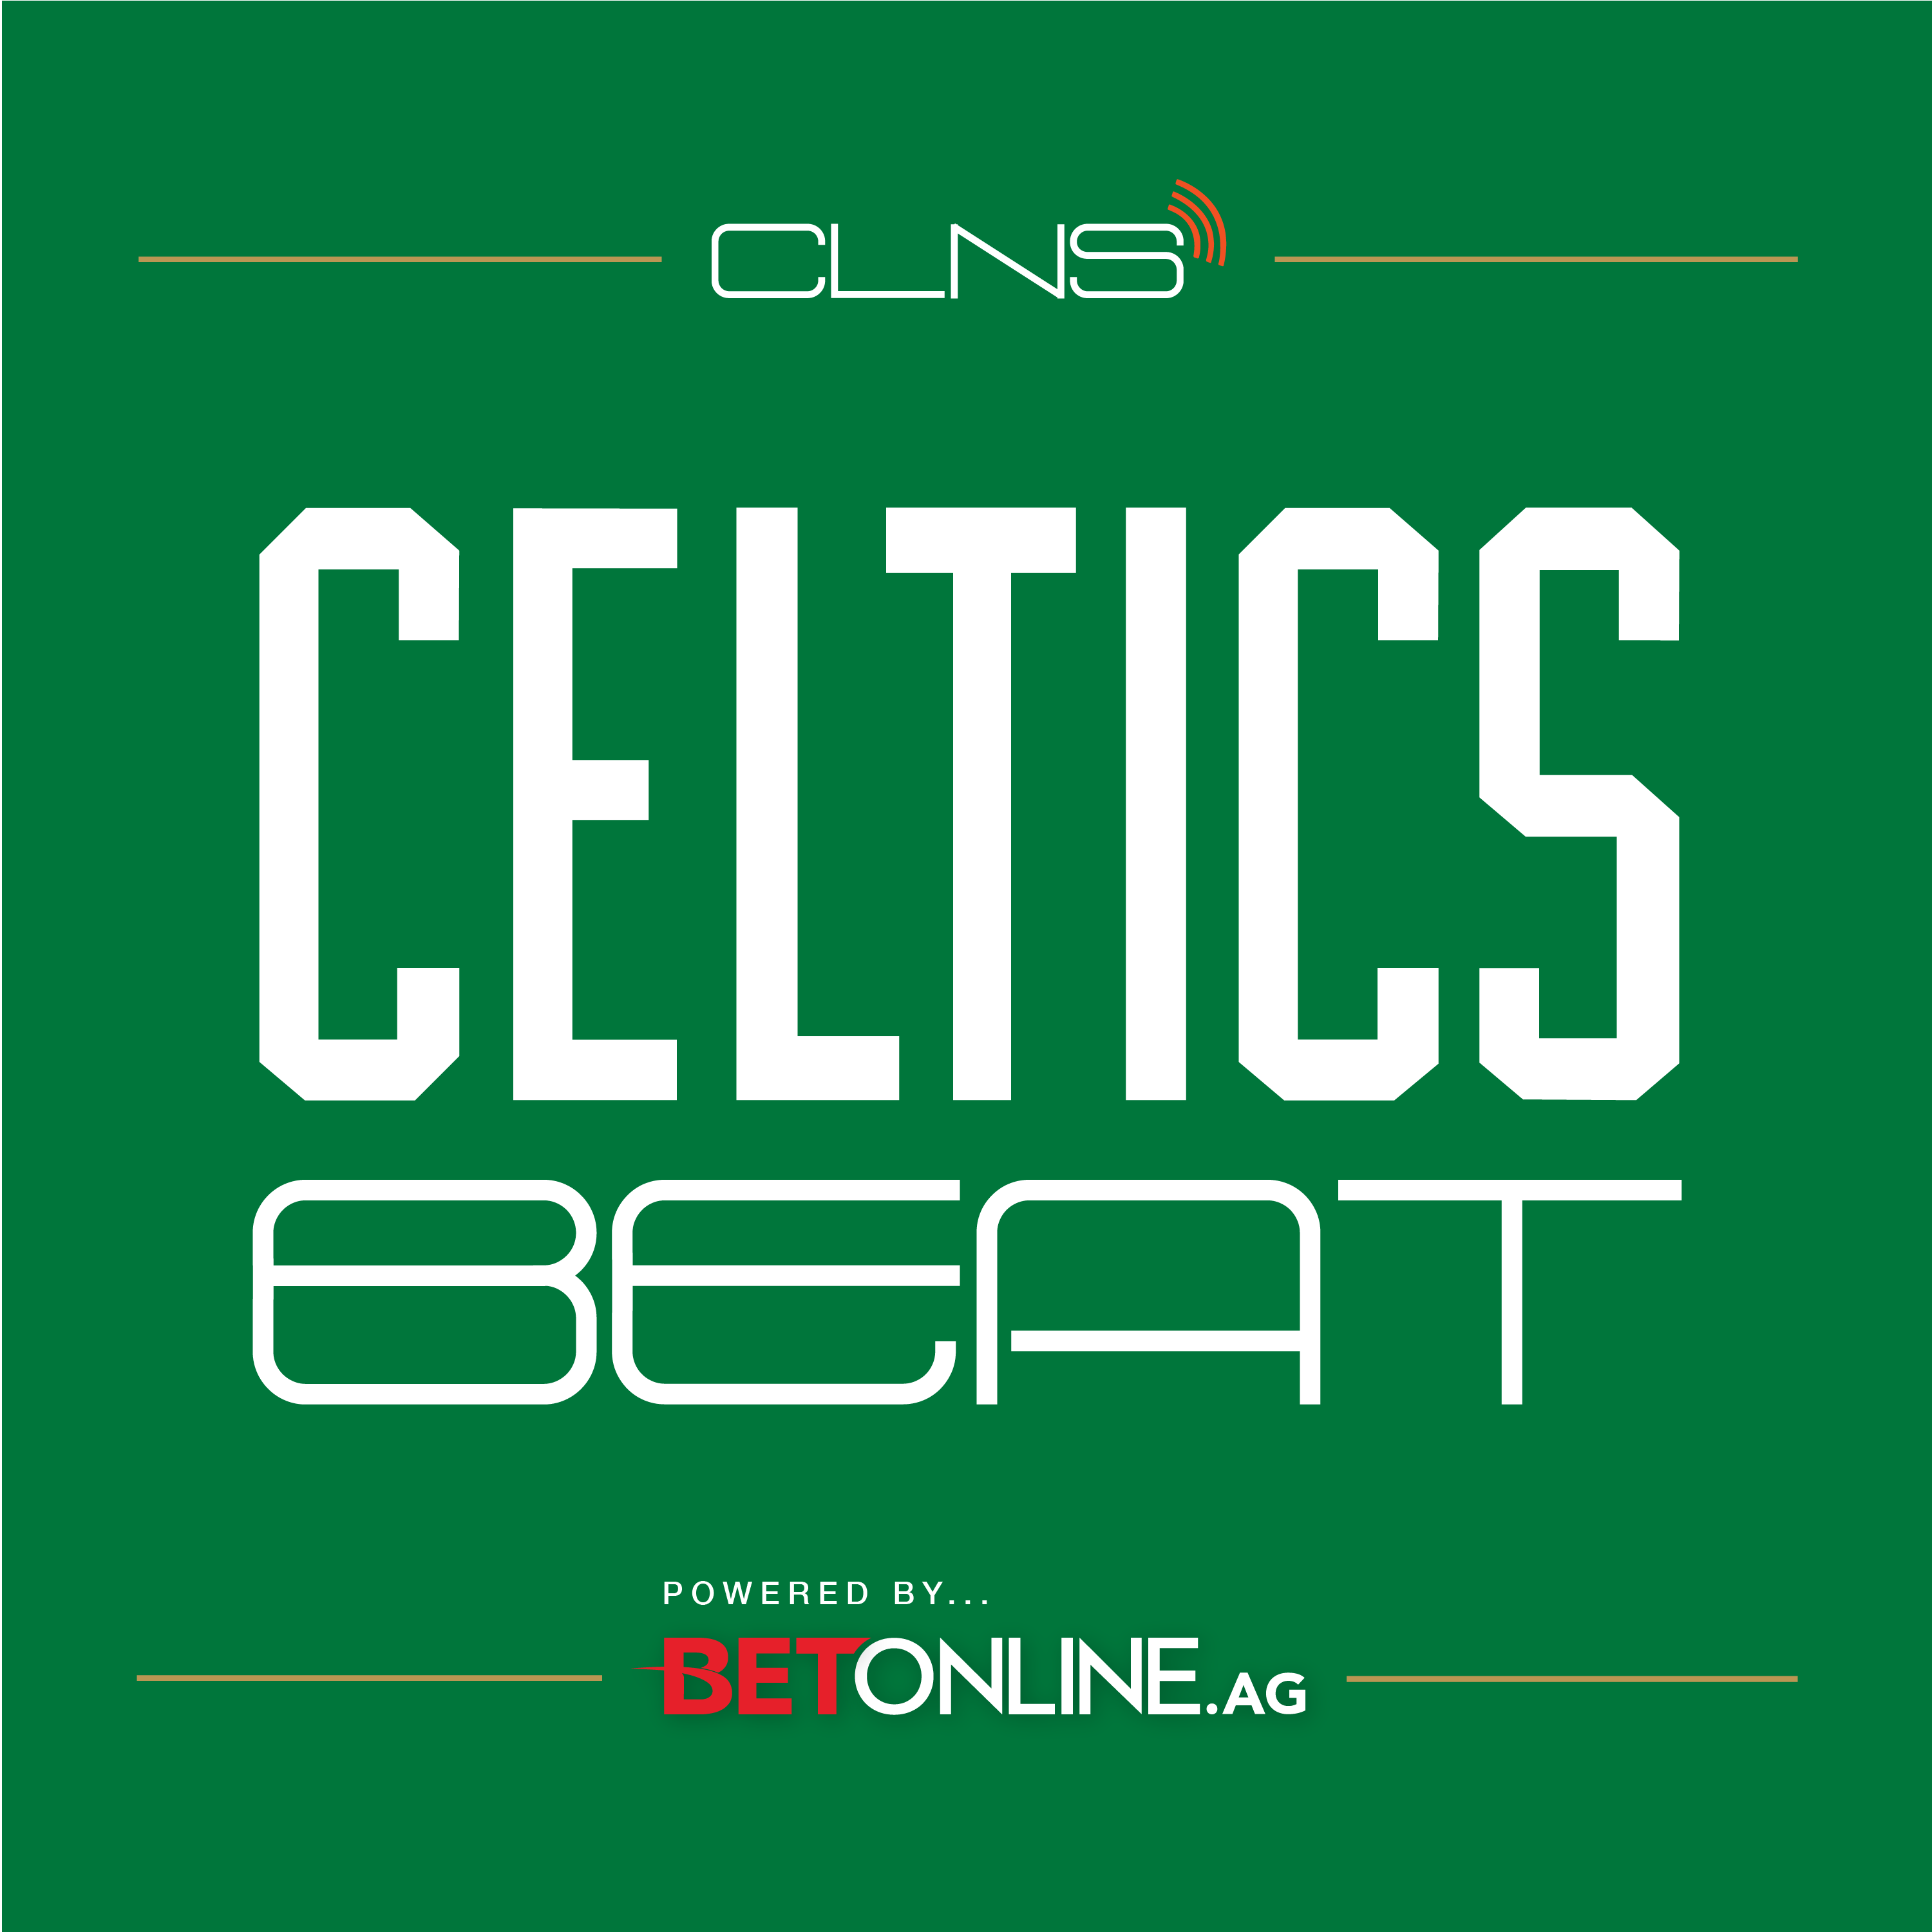 A highlight from 453: We've Never Seen Anything Like the Celtics Turnaround w/ Mike Gorman